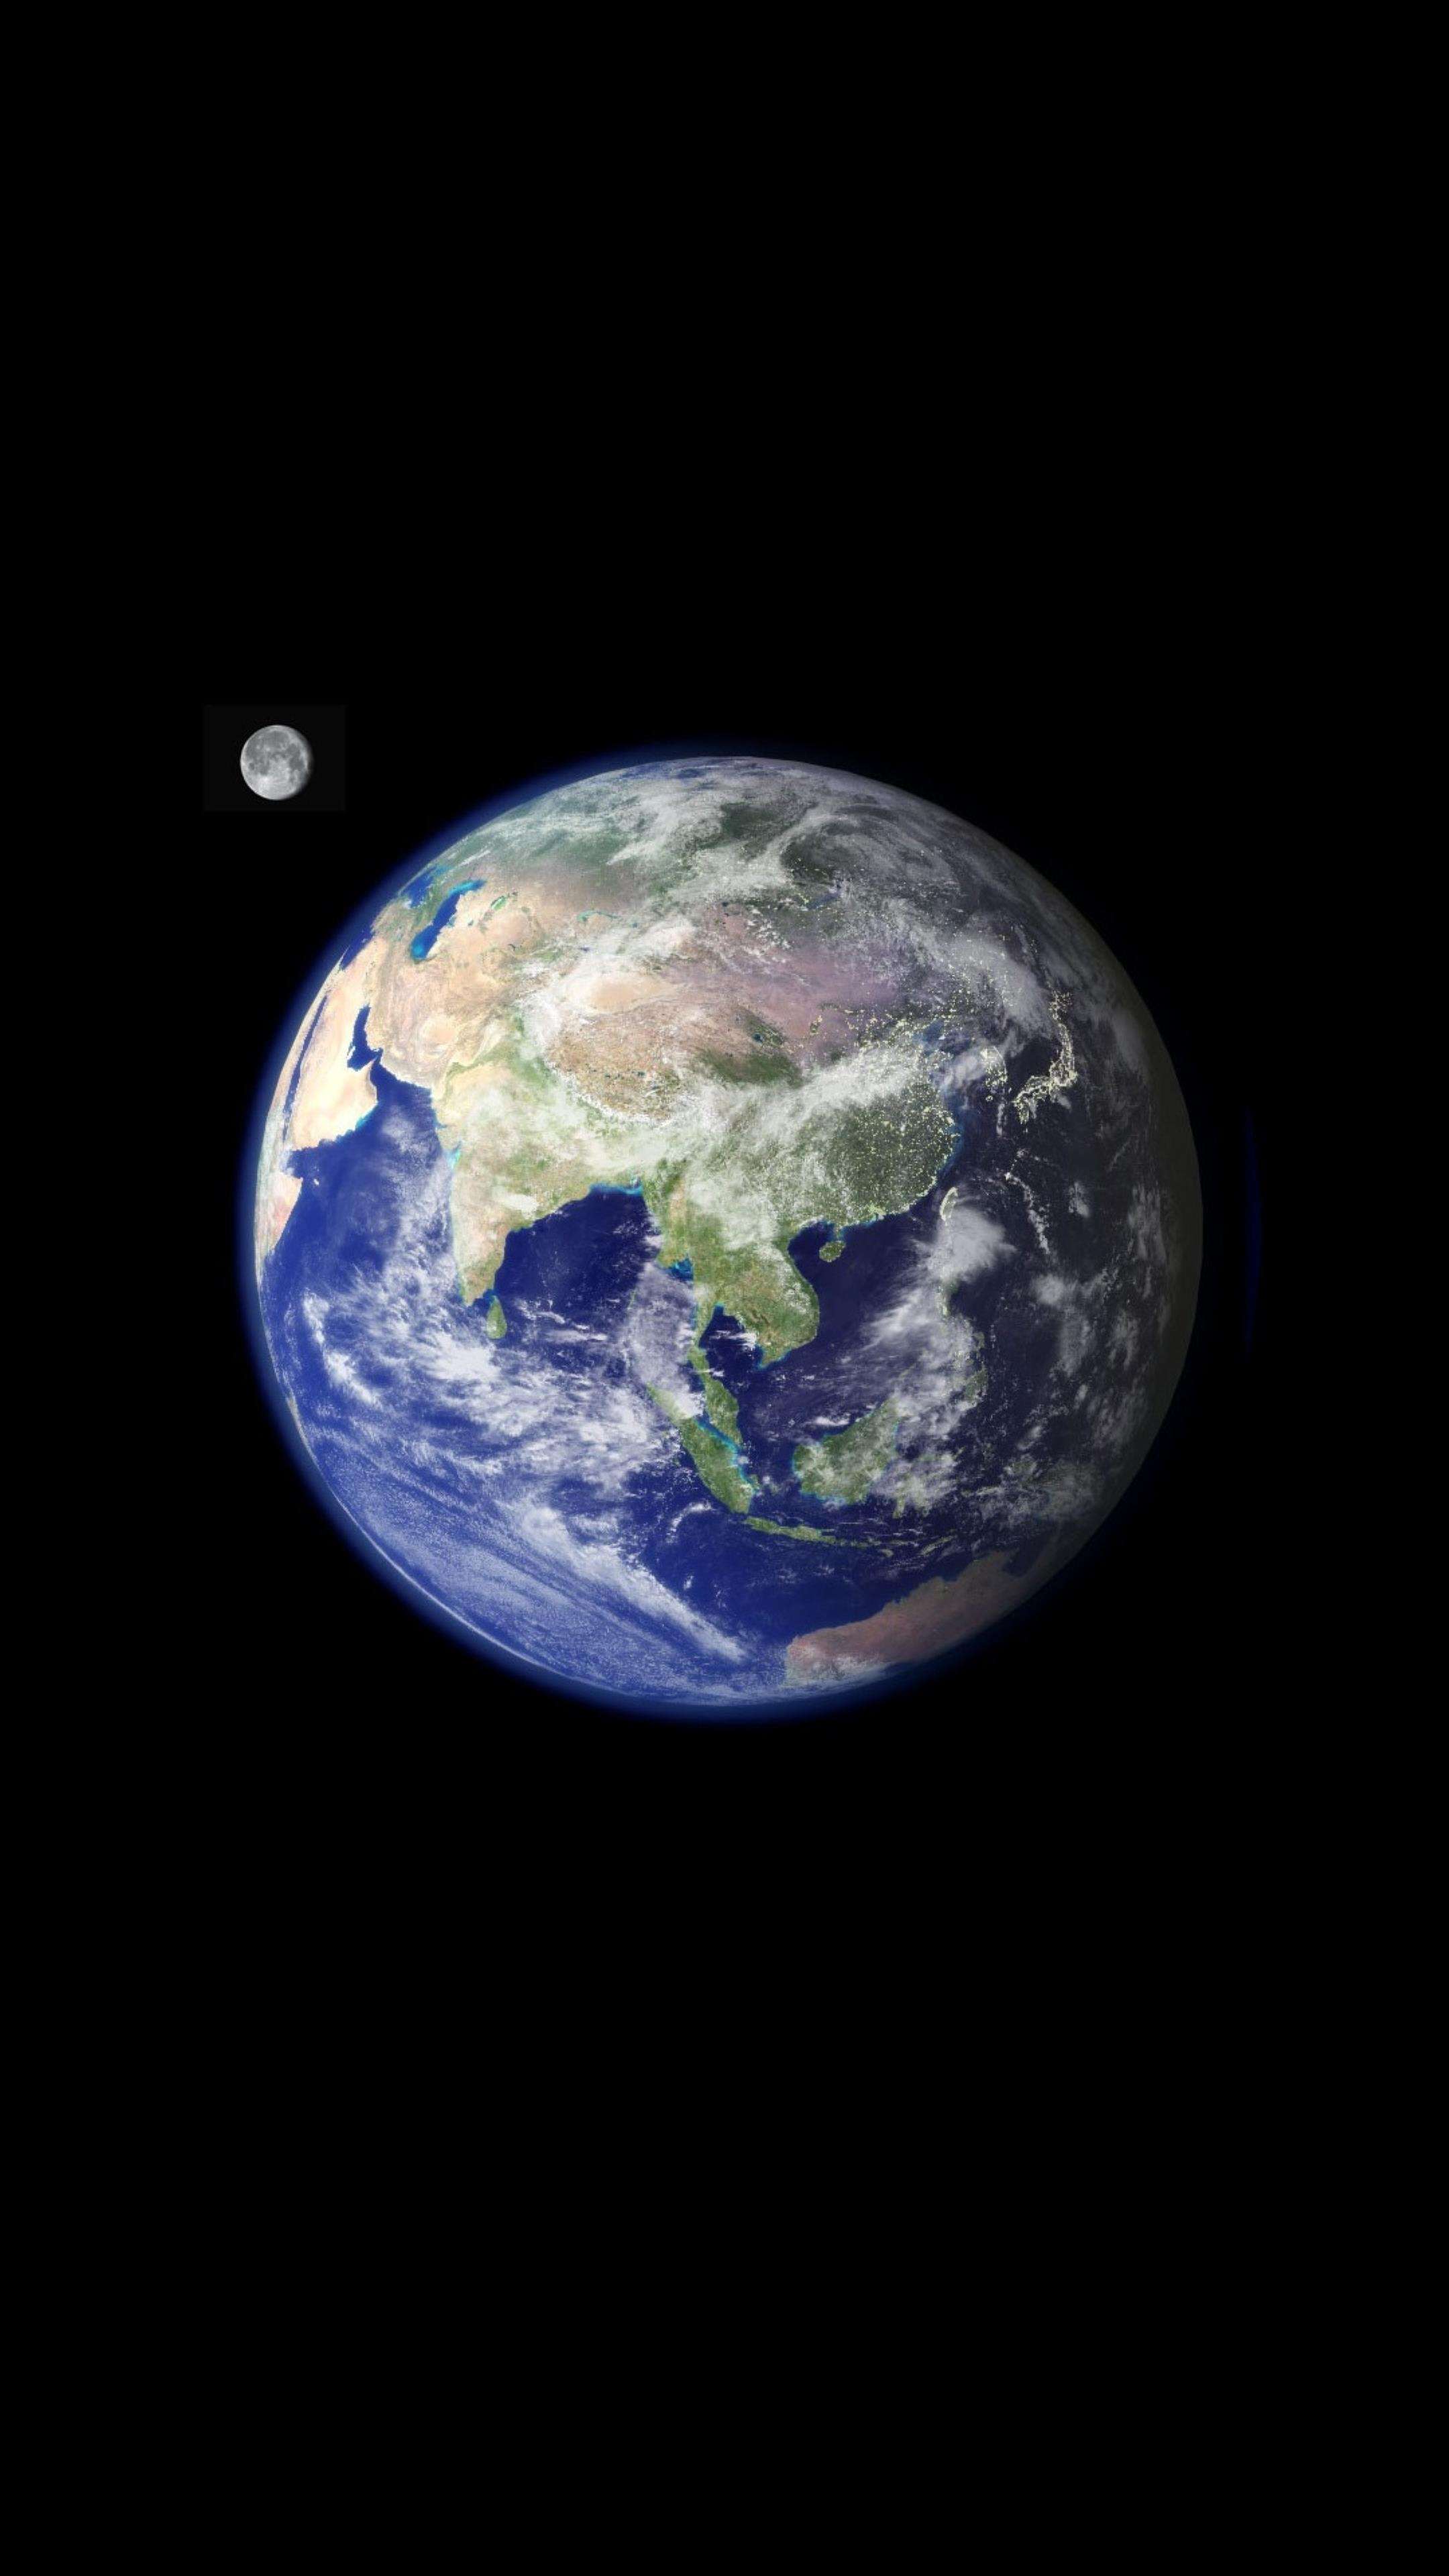 The earth is shown in a black background - Earth